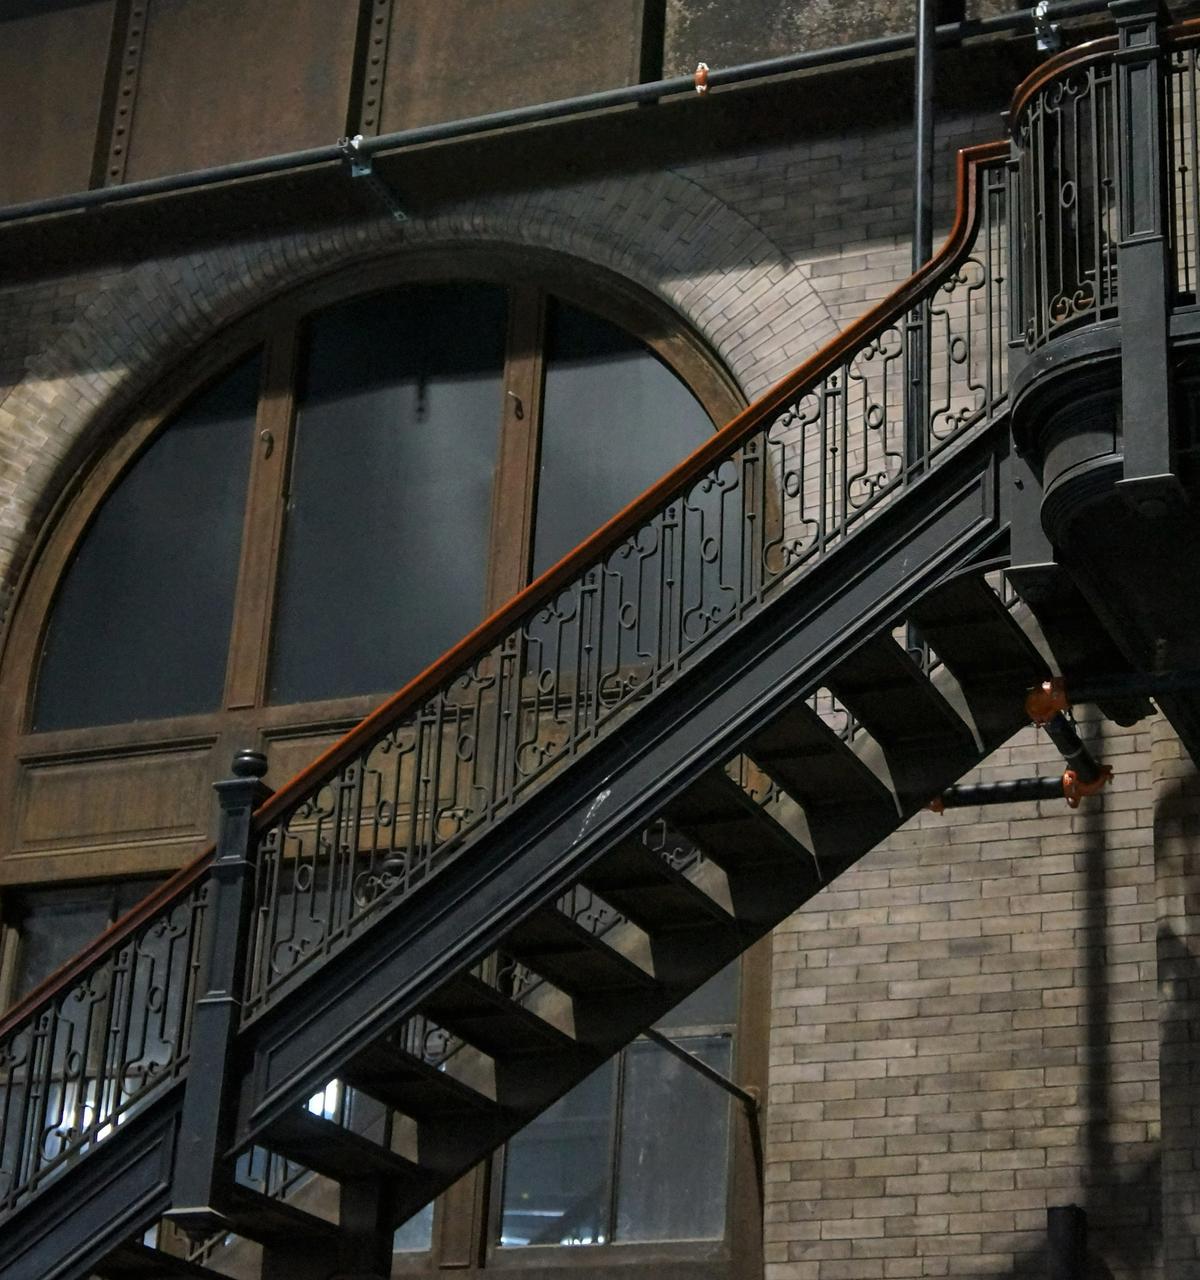 Wrought-iron staircases and arched windows were part of an effort to make the plant less intimidating to visitors paying their electric bills at a time when many people were nervous about introducing electricity in their homes. (Colleen Thomas/TNS)